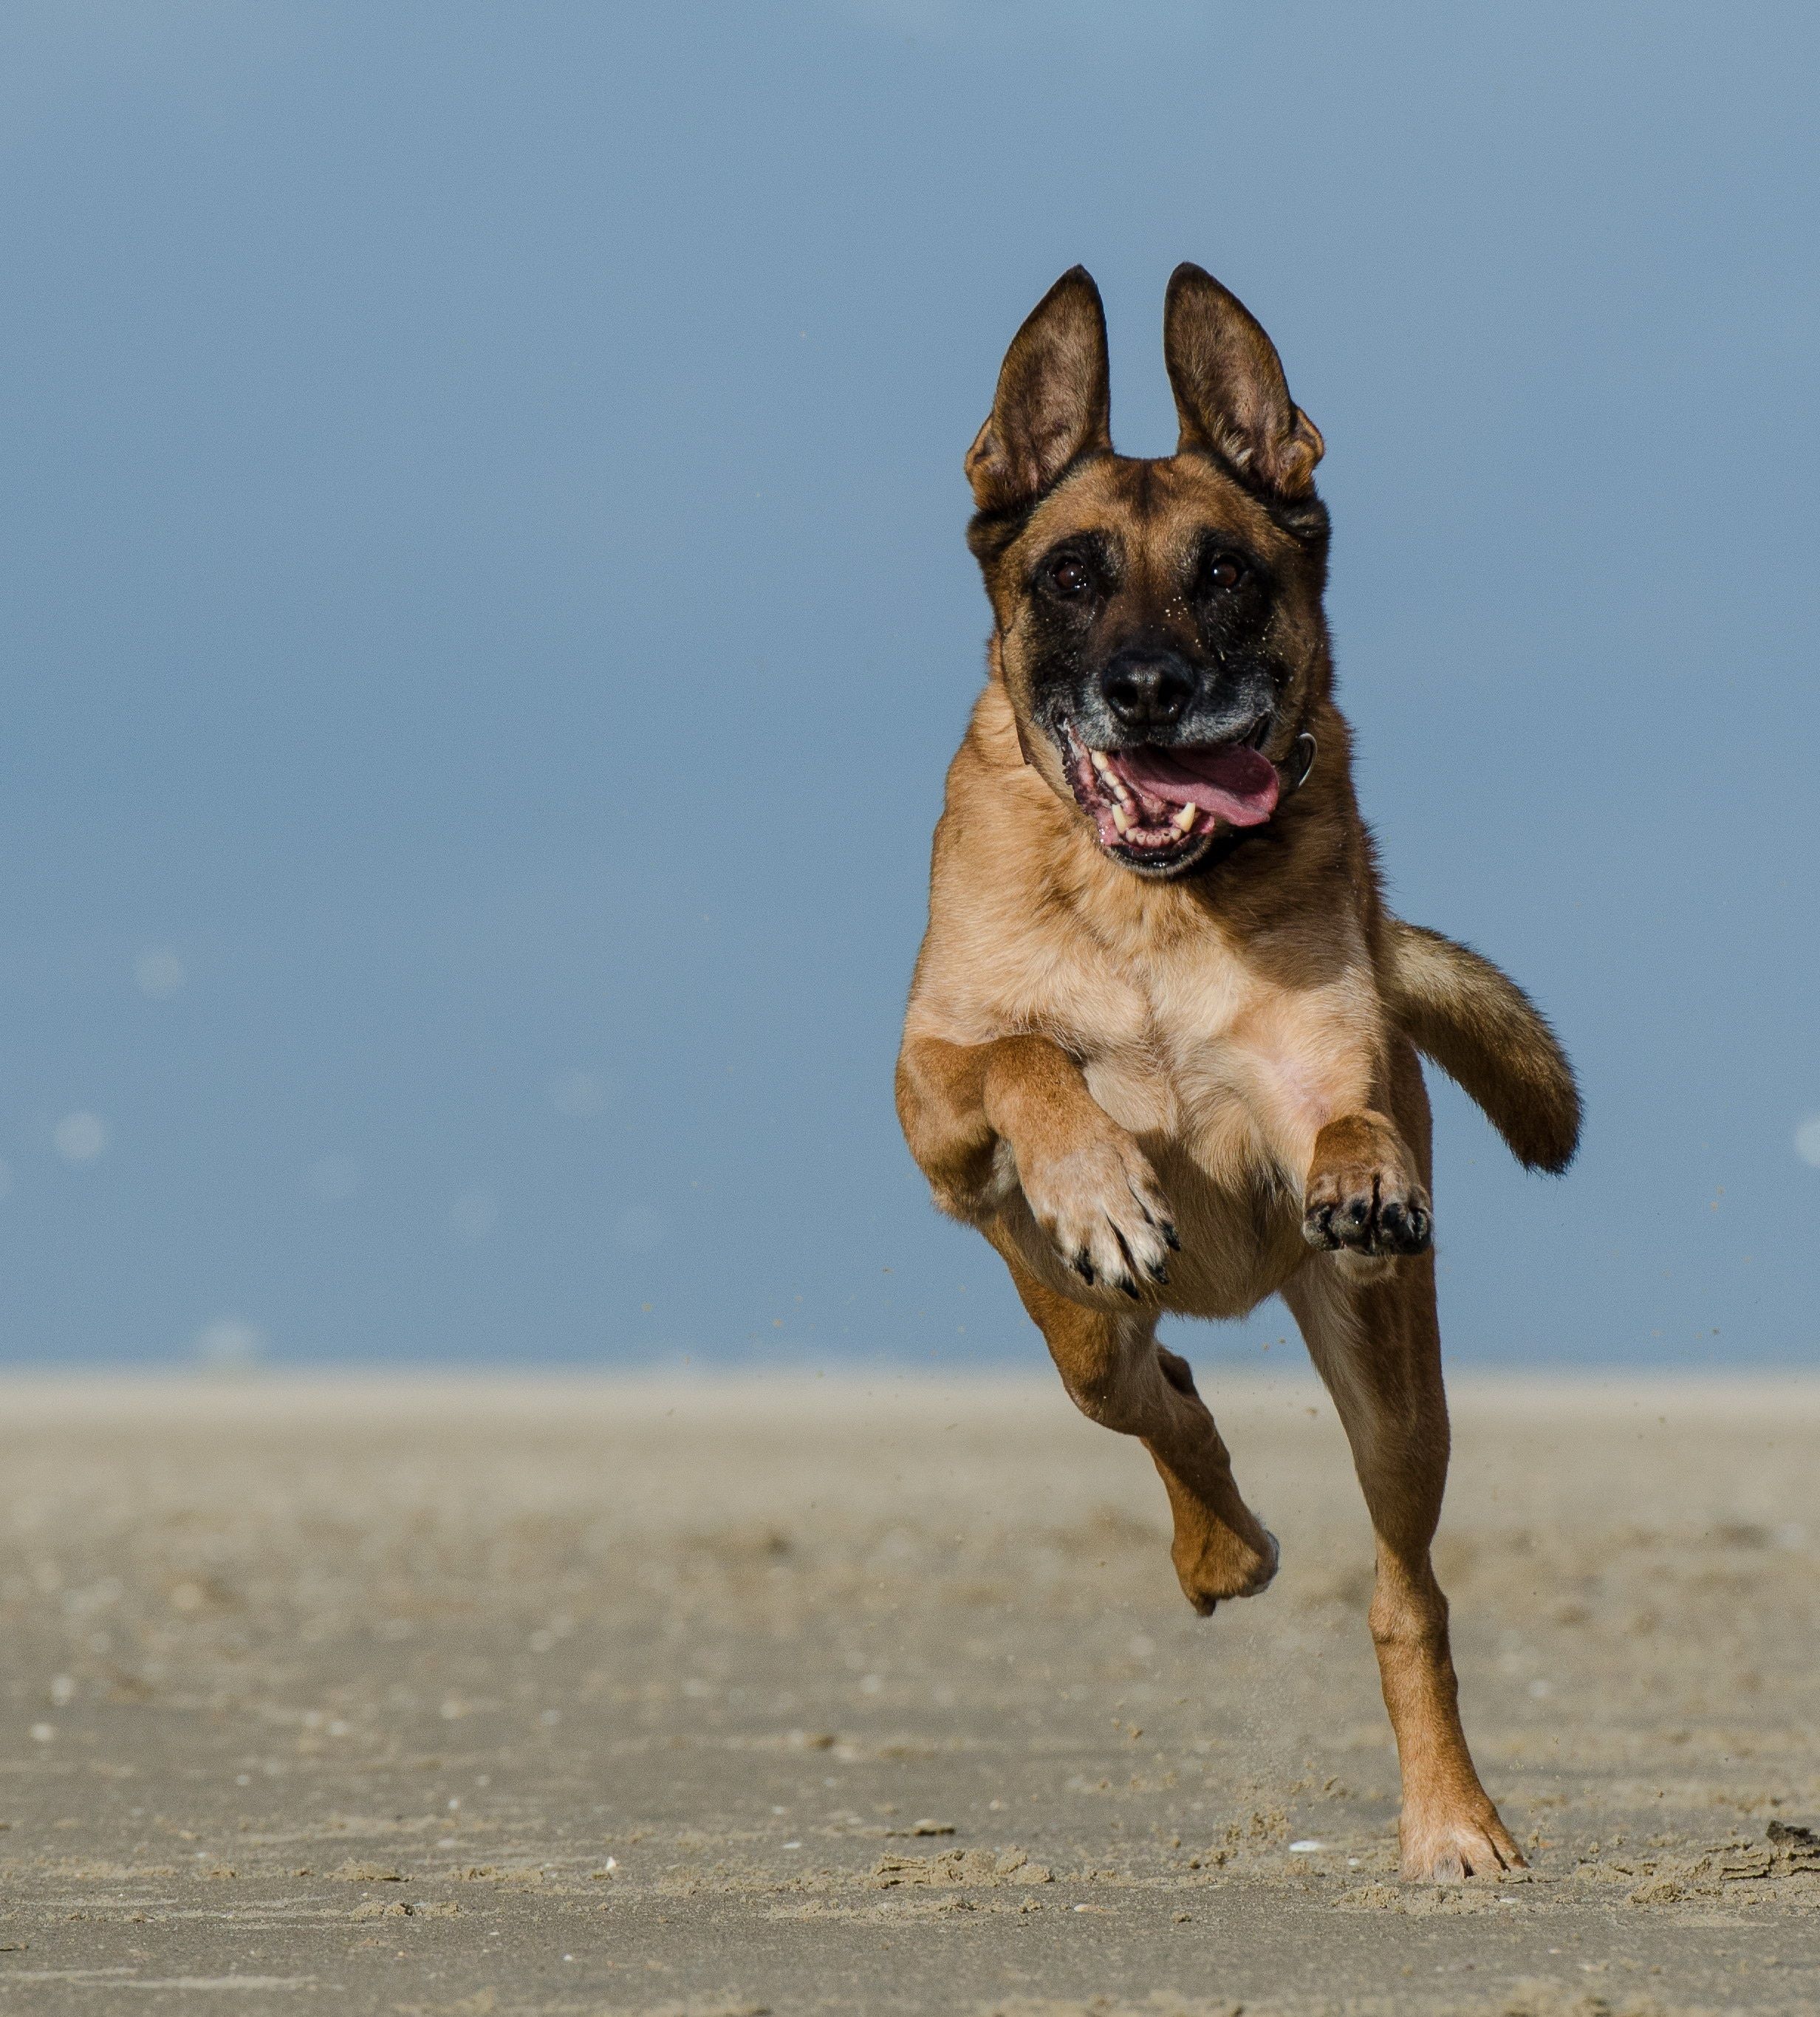 tan and black mask Belgian Malinois running while open mouth during